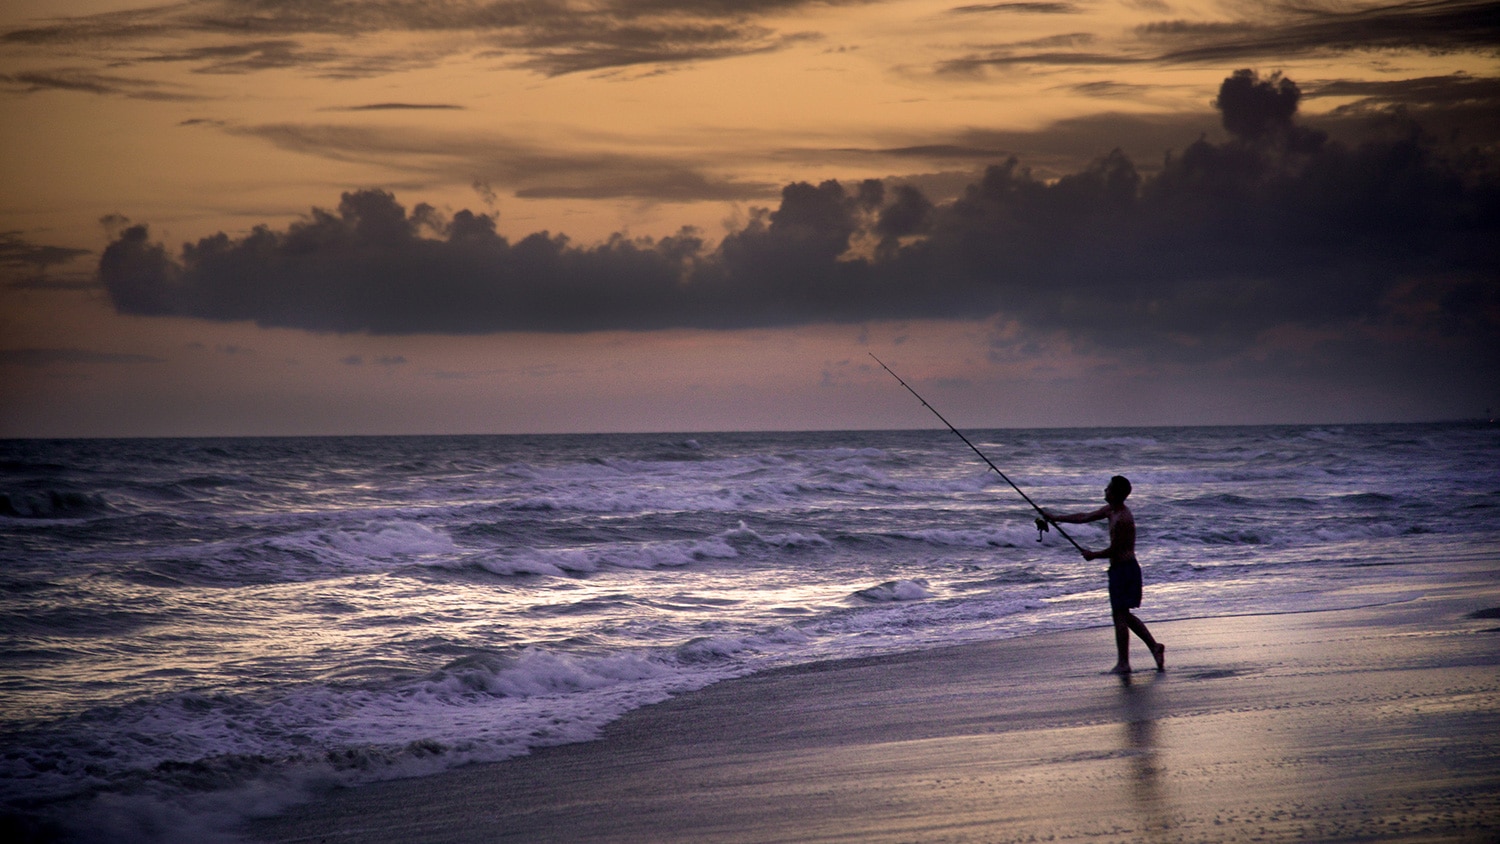 A fisherman on a beach casts his fishing rod into the ocean with the sun setting in the background